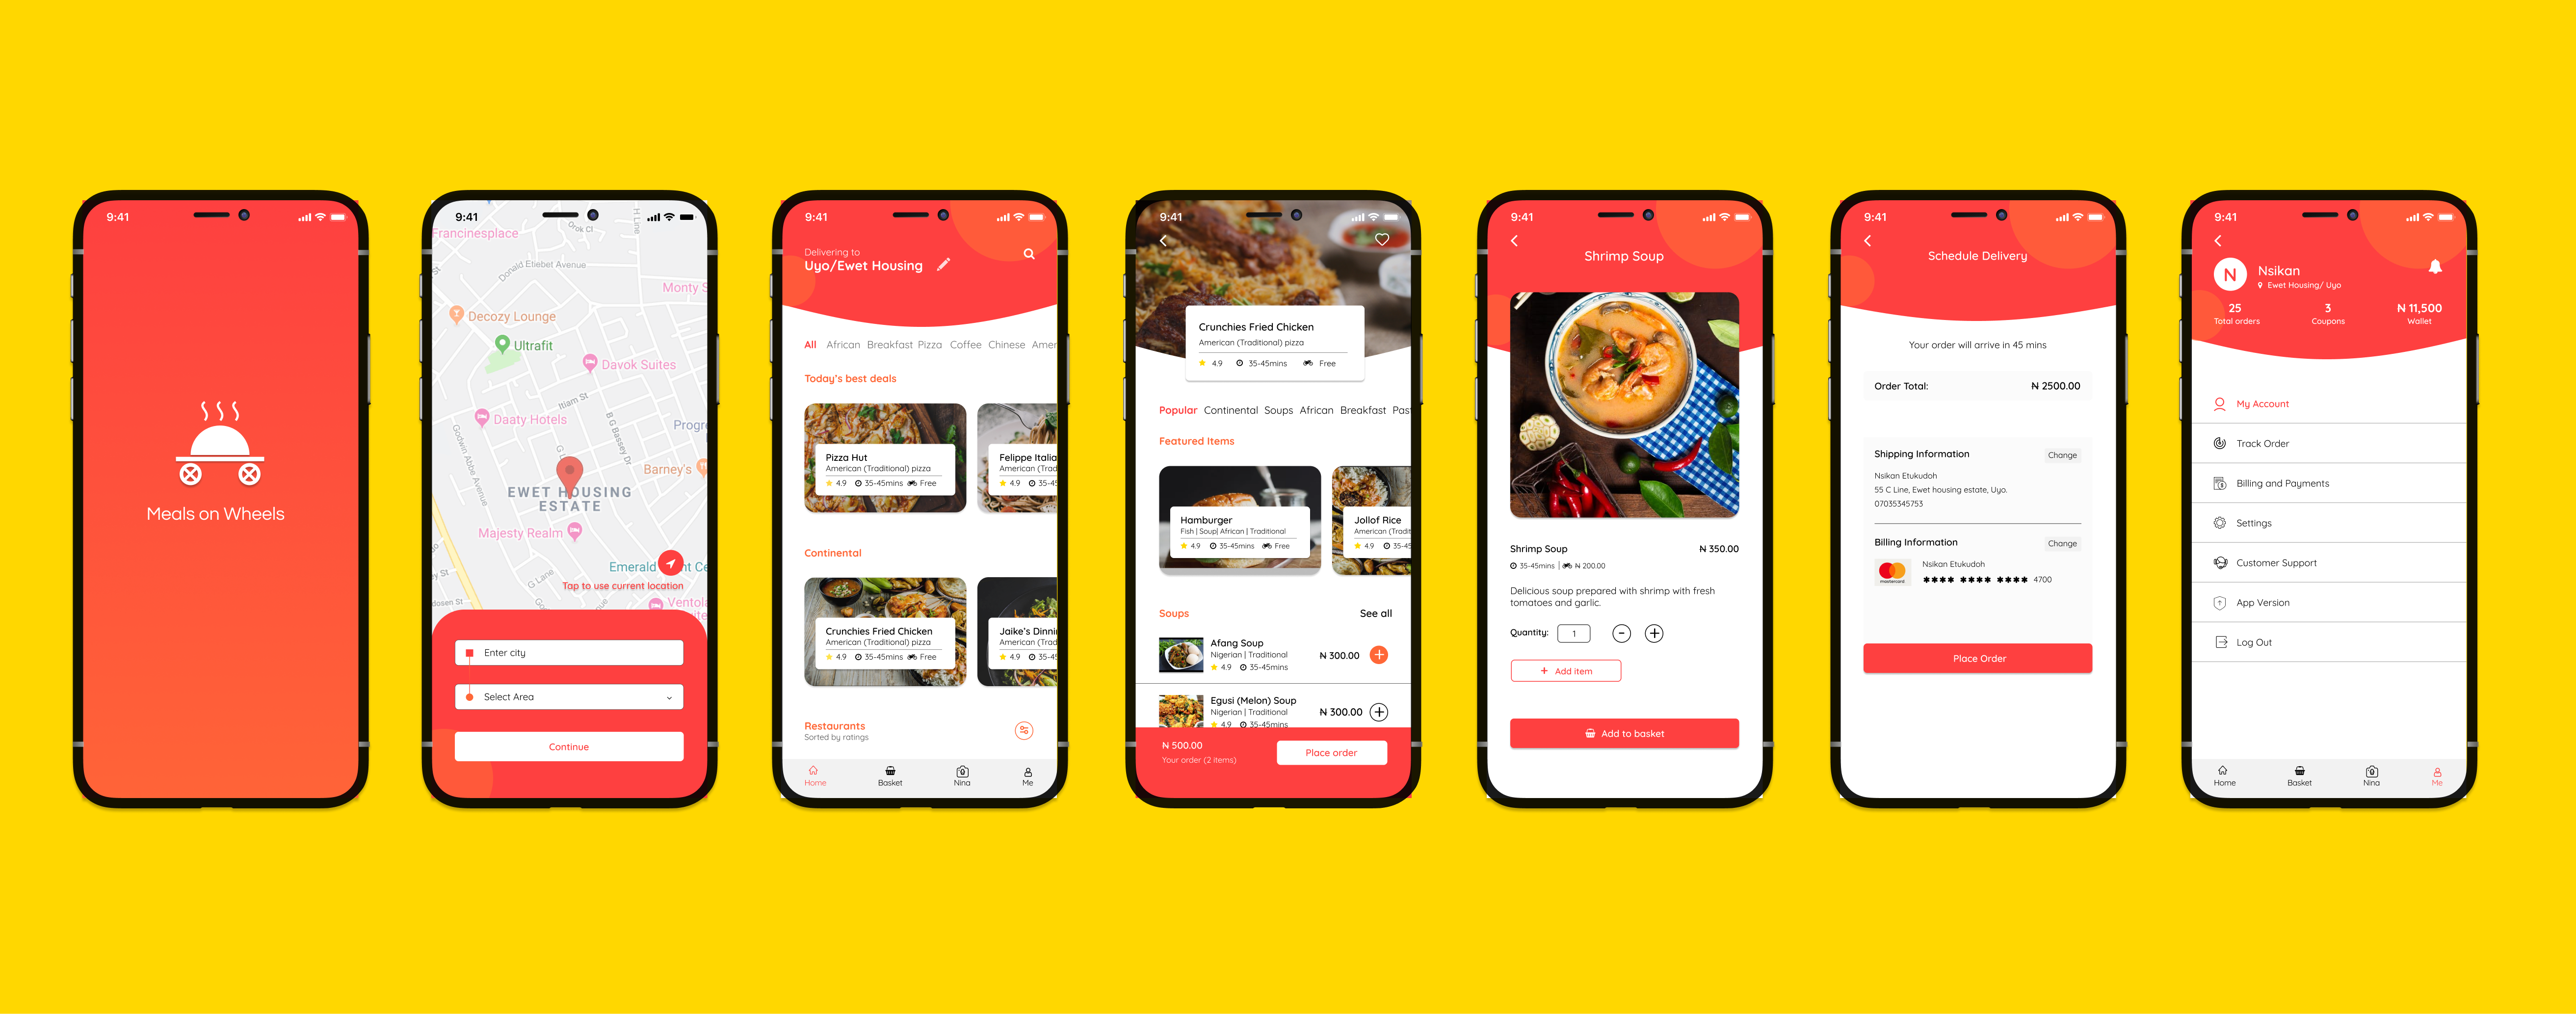 UI/UX Case study: Designing a food delivery app (Meals on ...